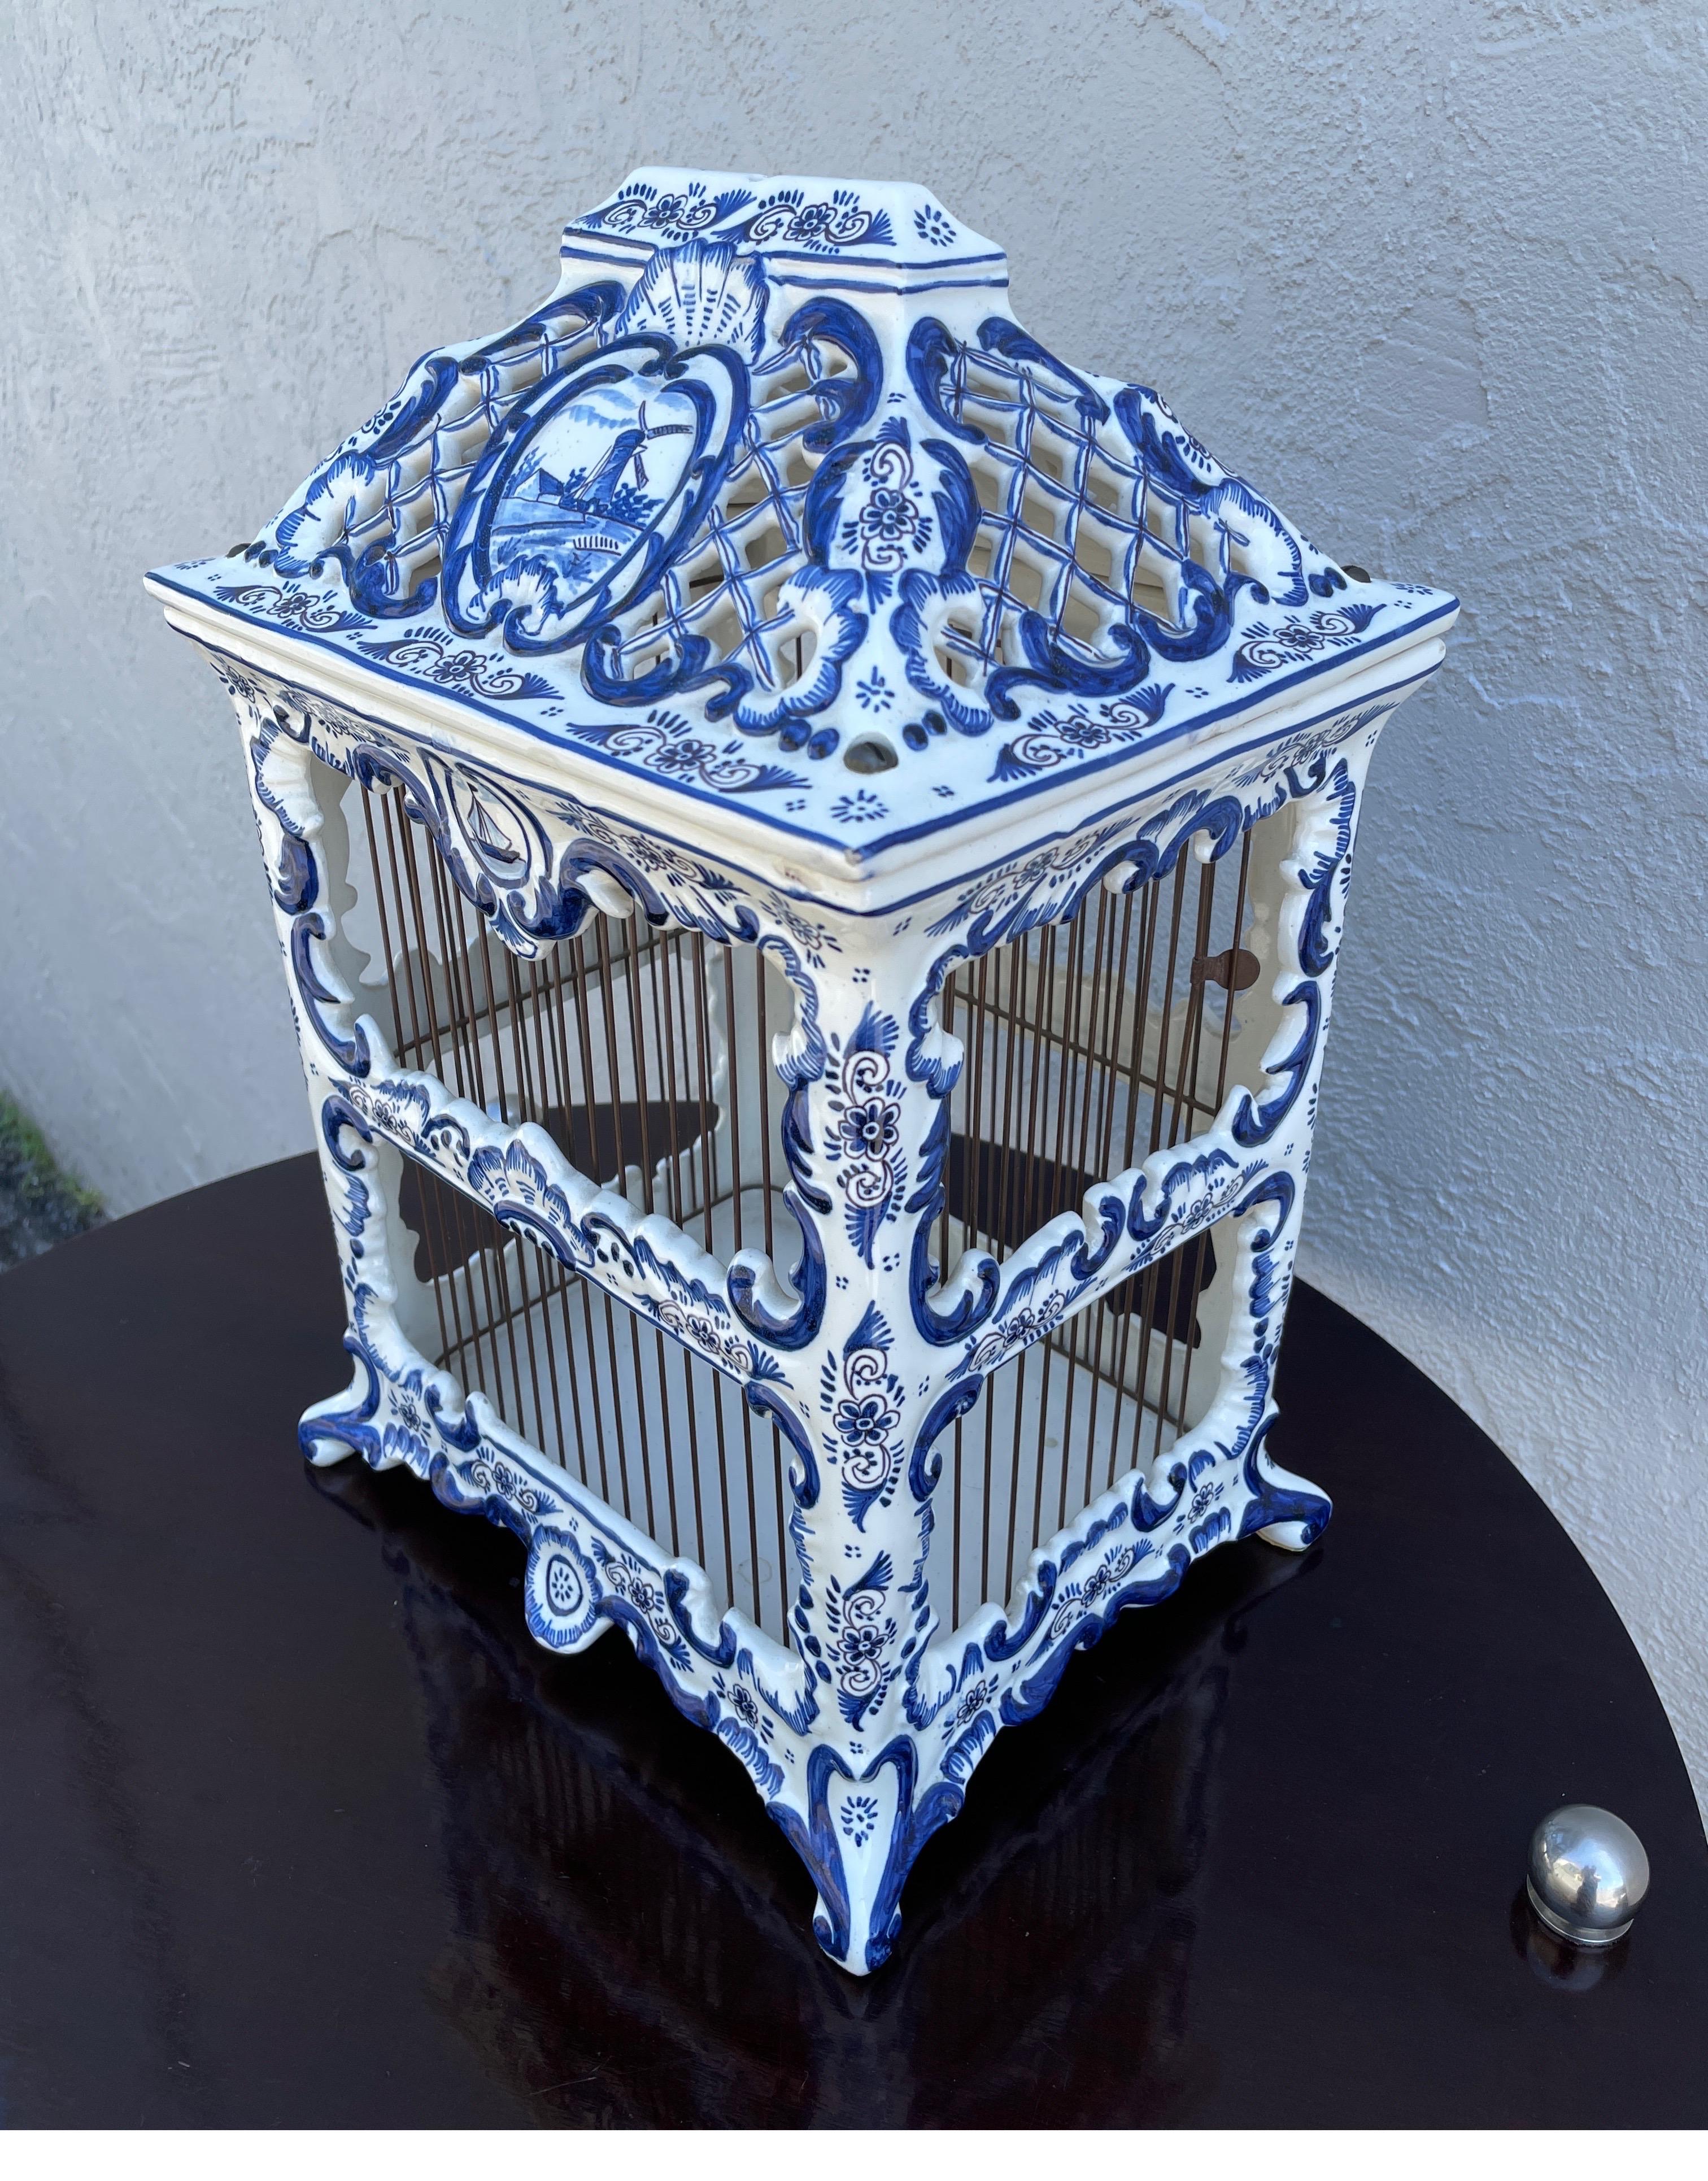 Pierced porcelain blue & white birdcage. Could easily be wired as a table lamp or hanging fixture.